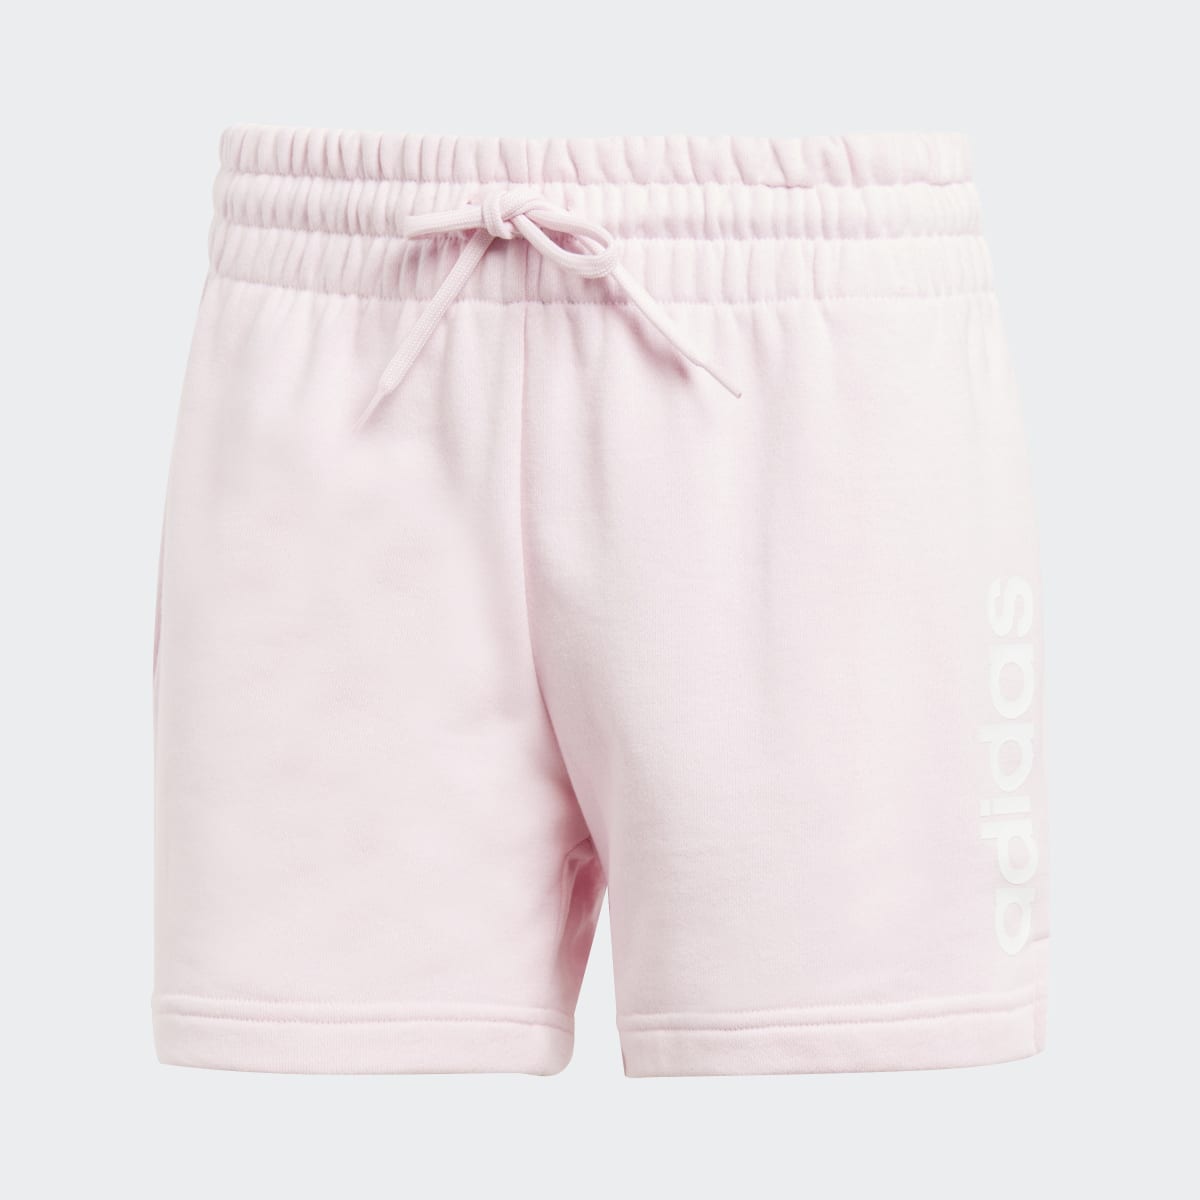 Adidas Essentials Linear French Terry Shorts. 4